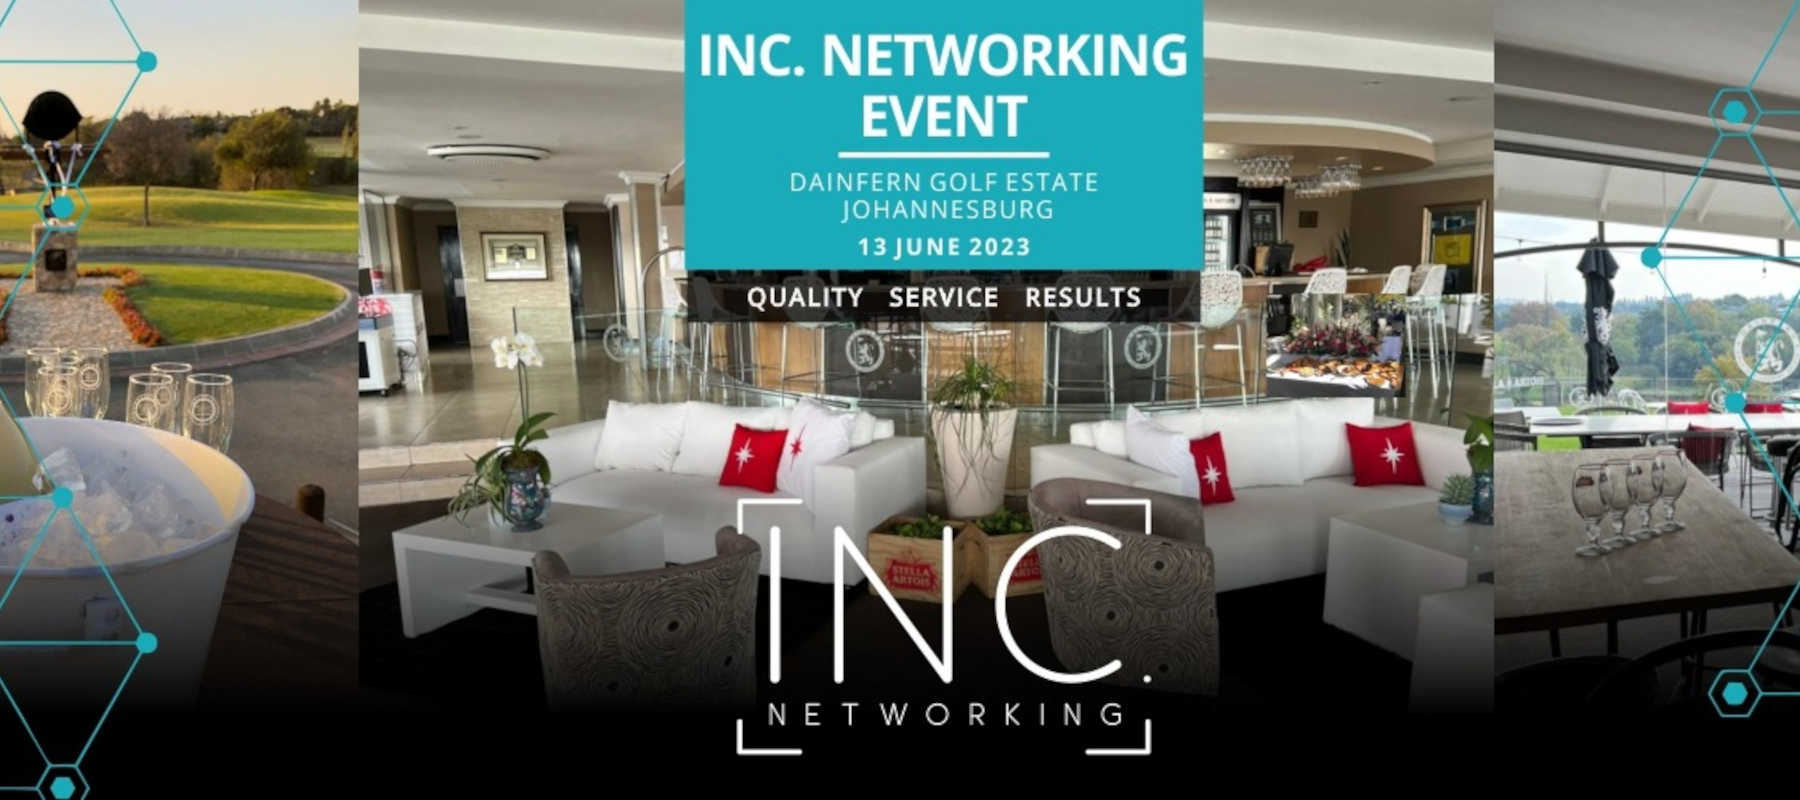 INC. Networking Event | Johannesburg South Africa | 13 June 2023